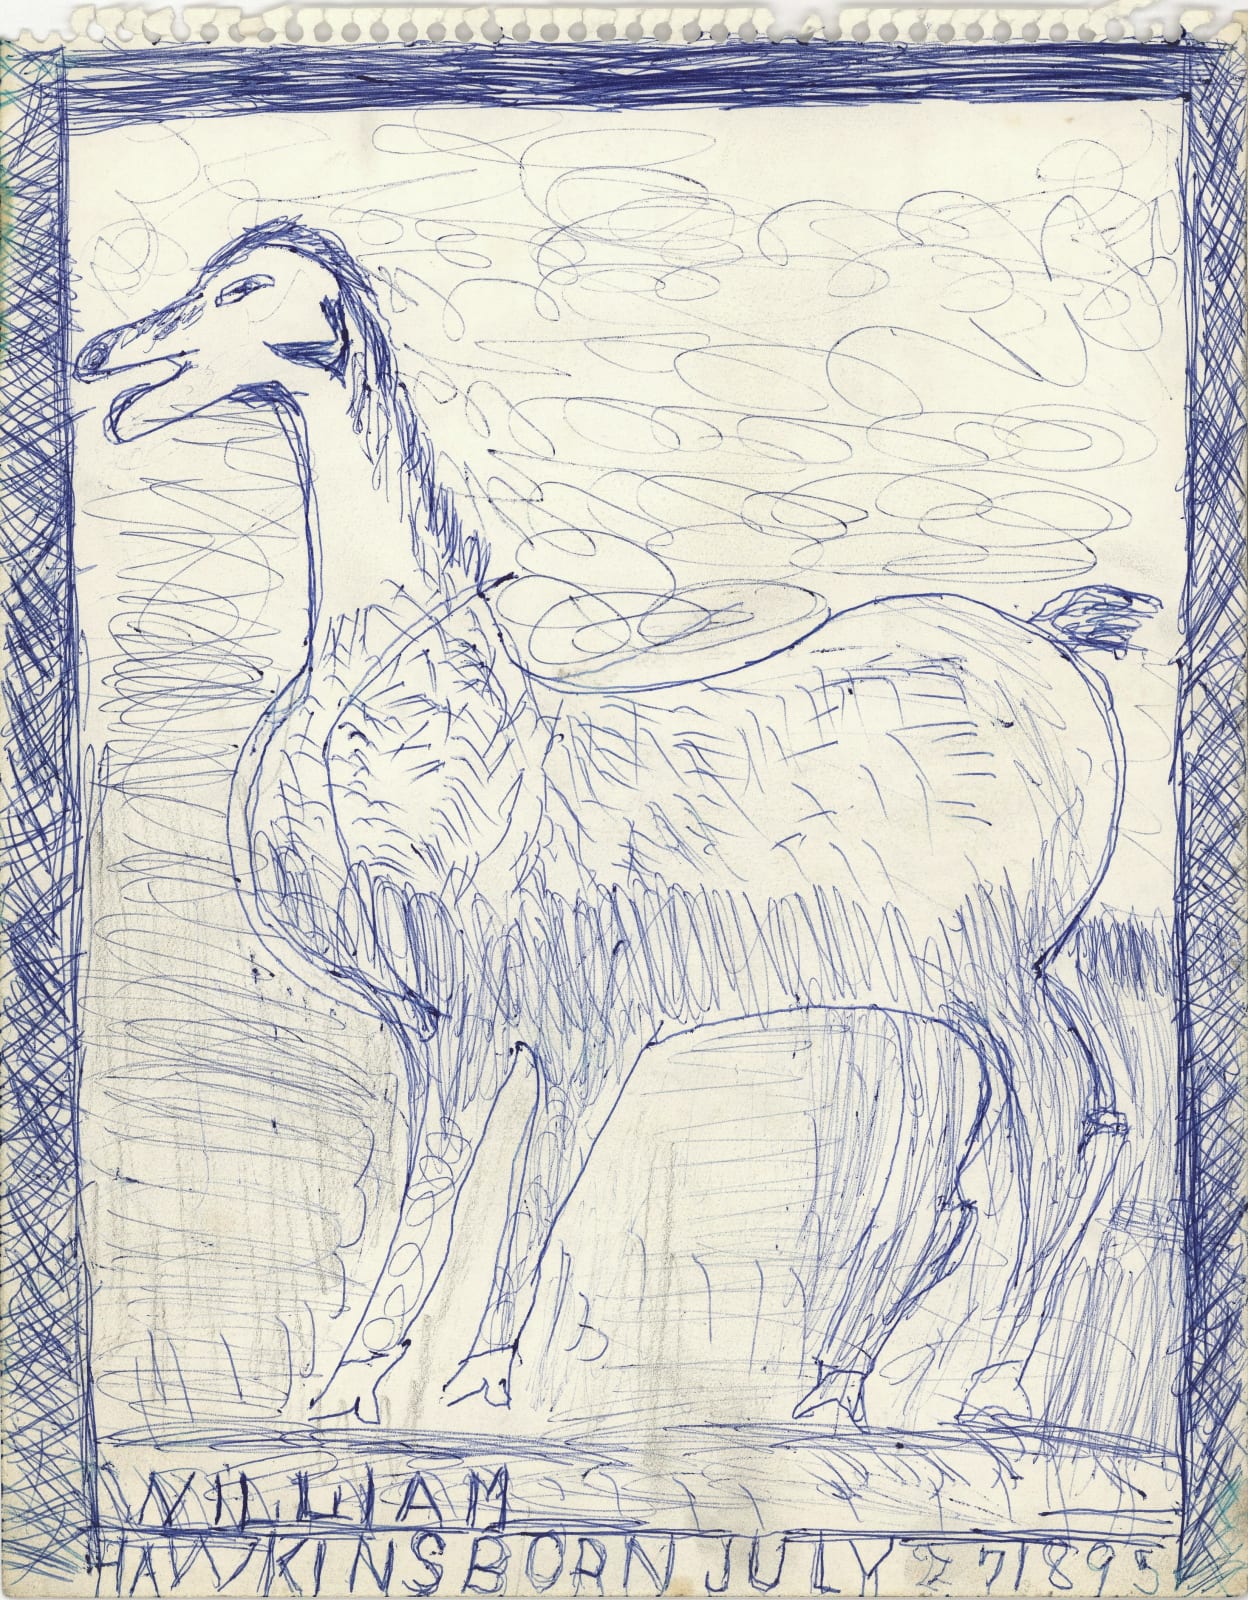 Horse #1 Ballpoint pen and graphite on paper 14 x 11 in. (35.6 x 27.9 cm) (WH 431)